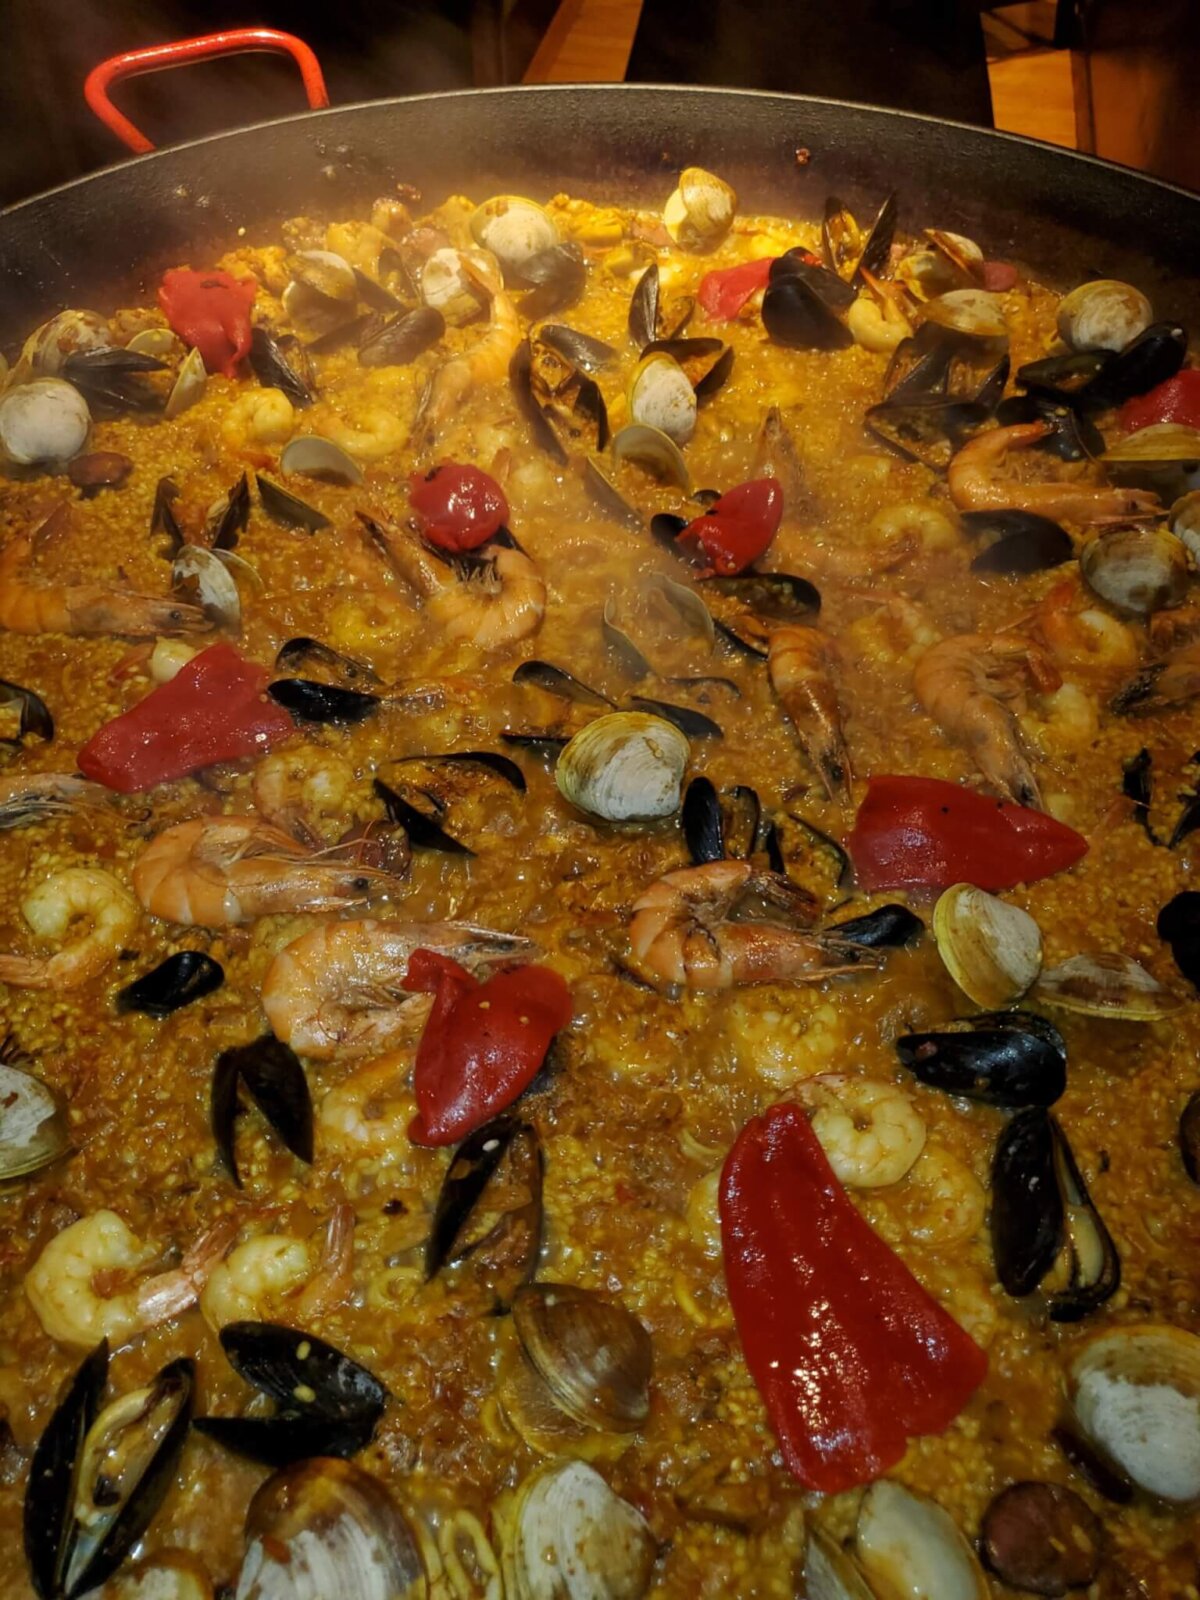 delicious Paella with shrimp, peppers, and clams